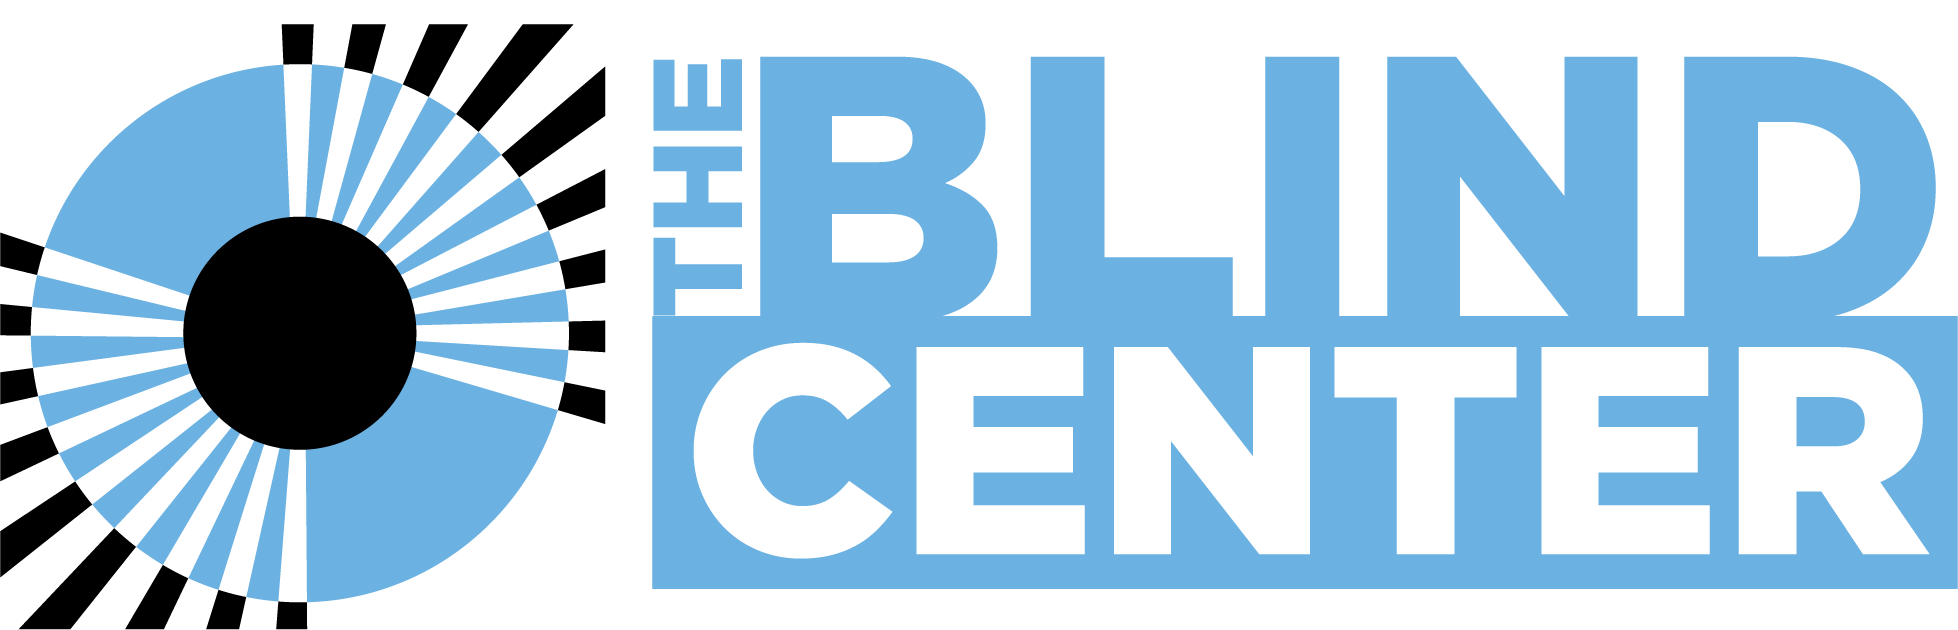 The Blind Center logo, published to "Web Design, WordPress, and Graphic Design for the Blind Center"